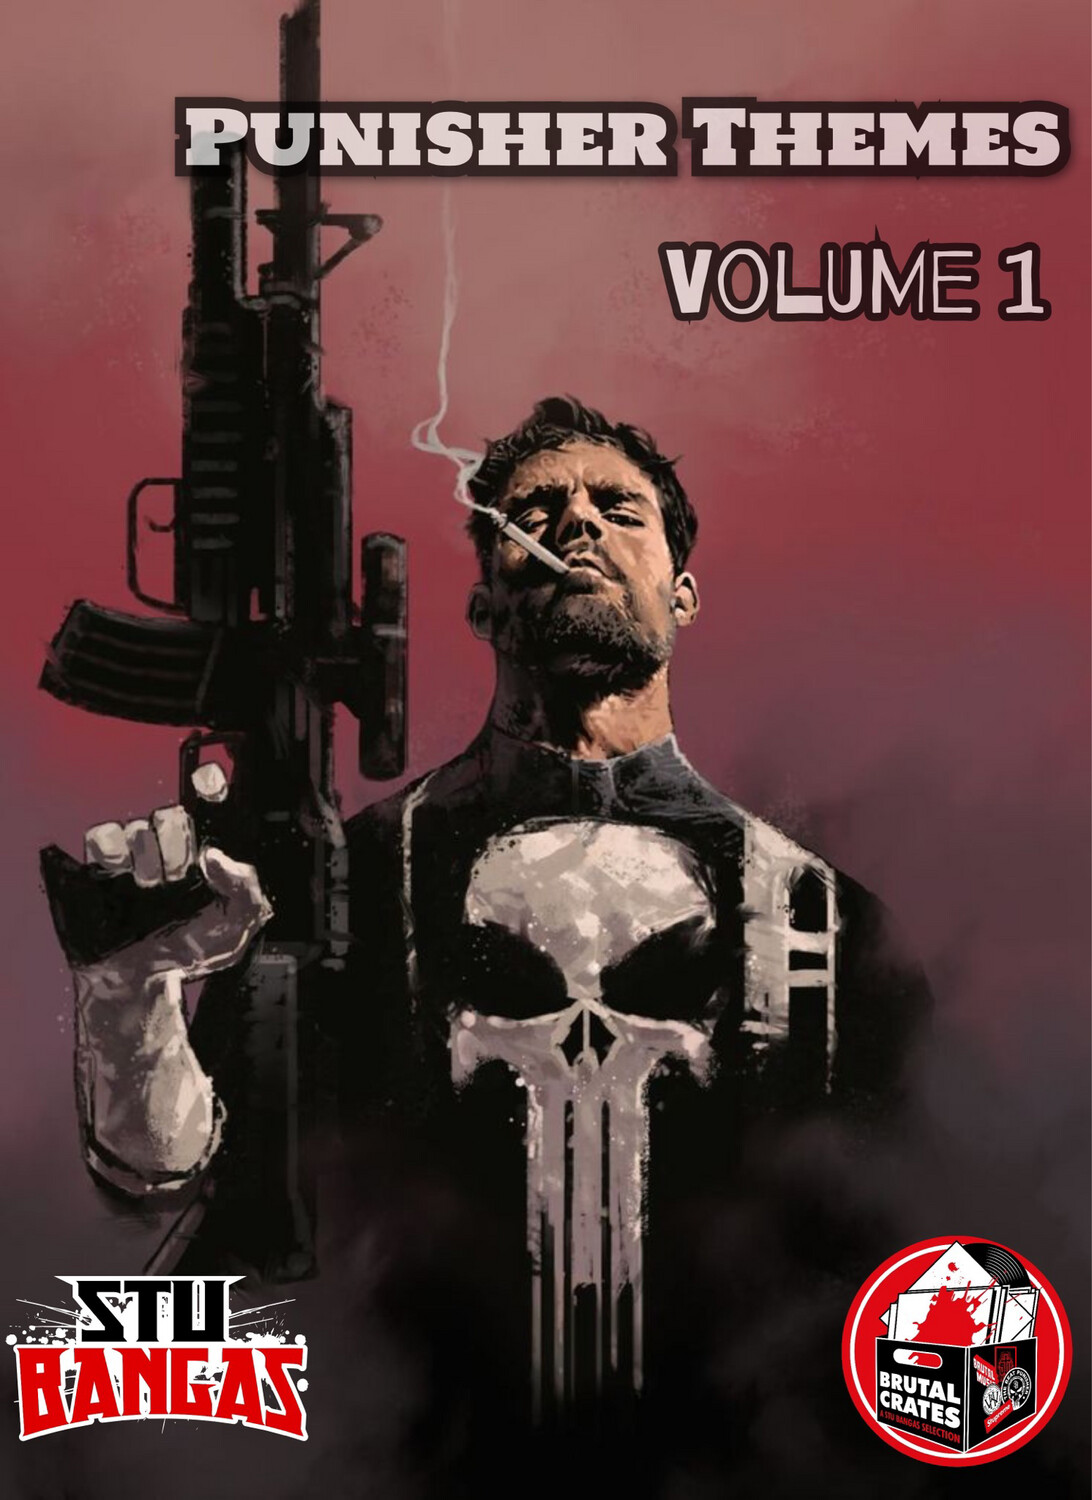 BRUTAL CRATES "PUNISHER THEME MUSIC VOL. 1" SAMPLE PACK (COMPOSITIONS ONLY)